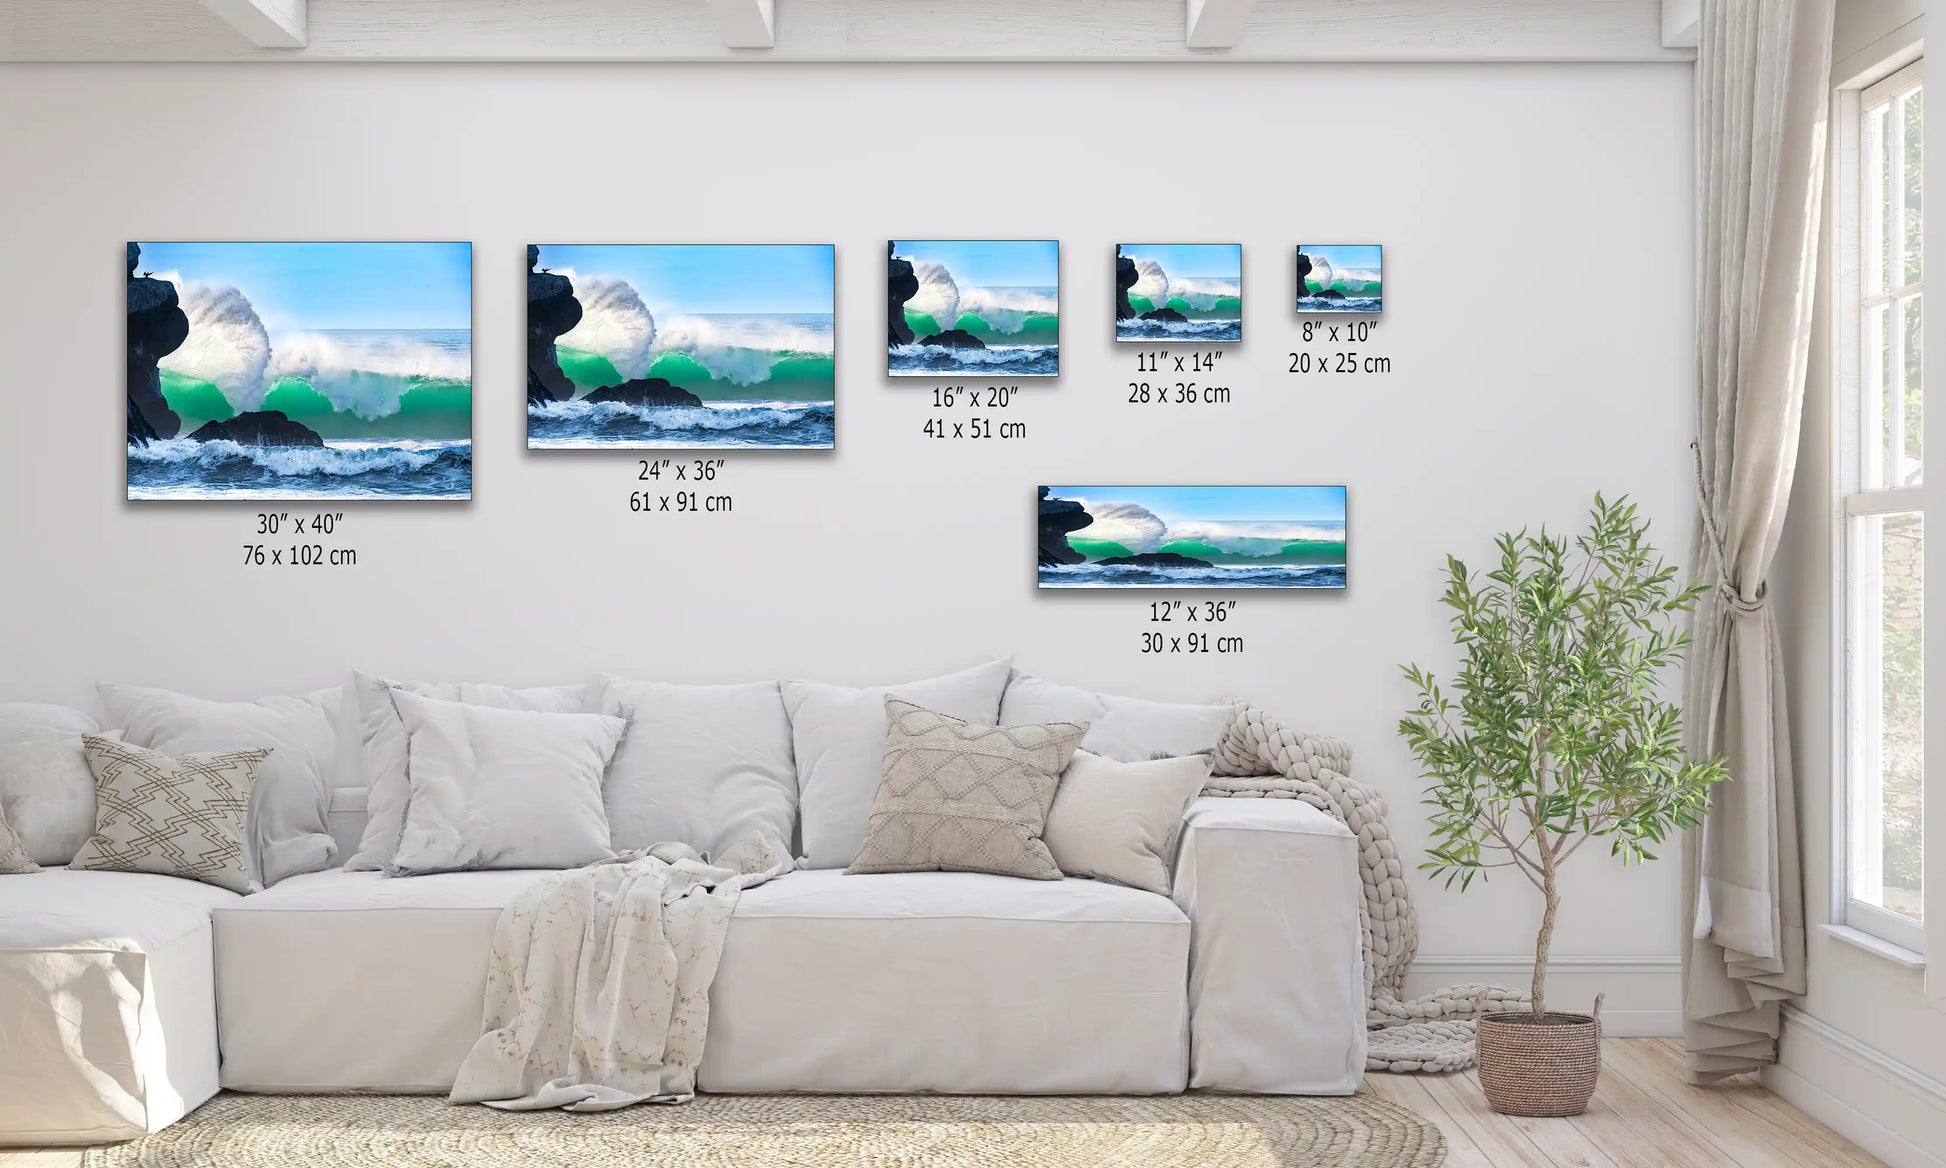 Multiple canvas prints of various sizes depicting a dynamic ocean wave by Morro Rock, displayed above a sofa for scale.